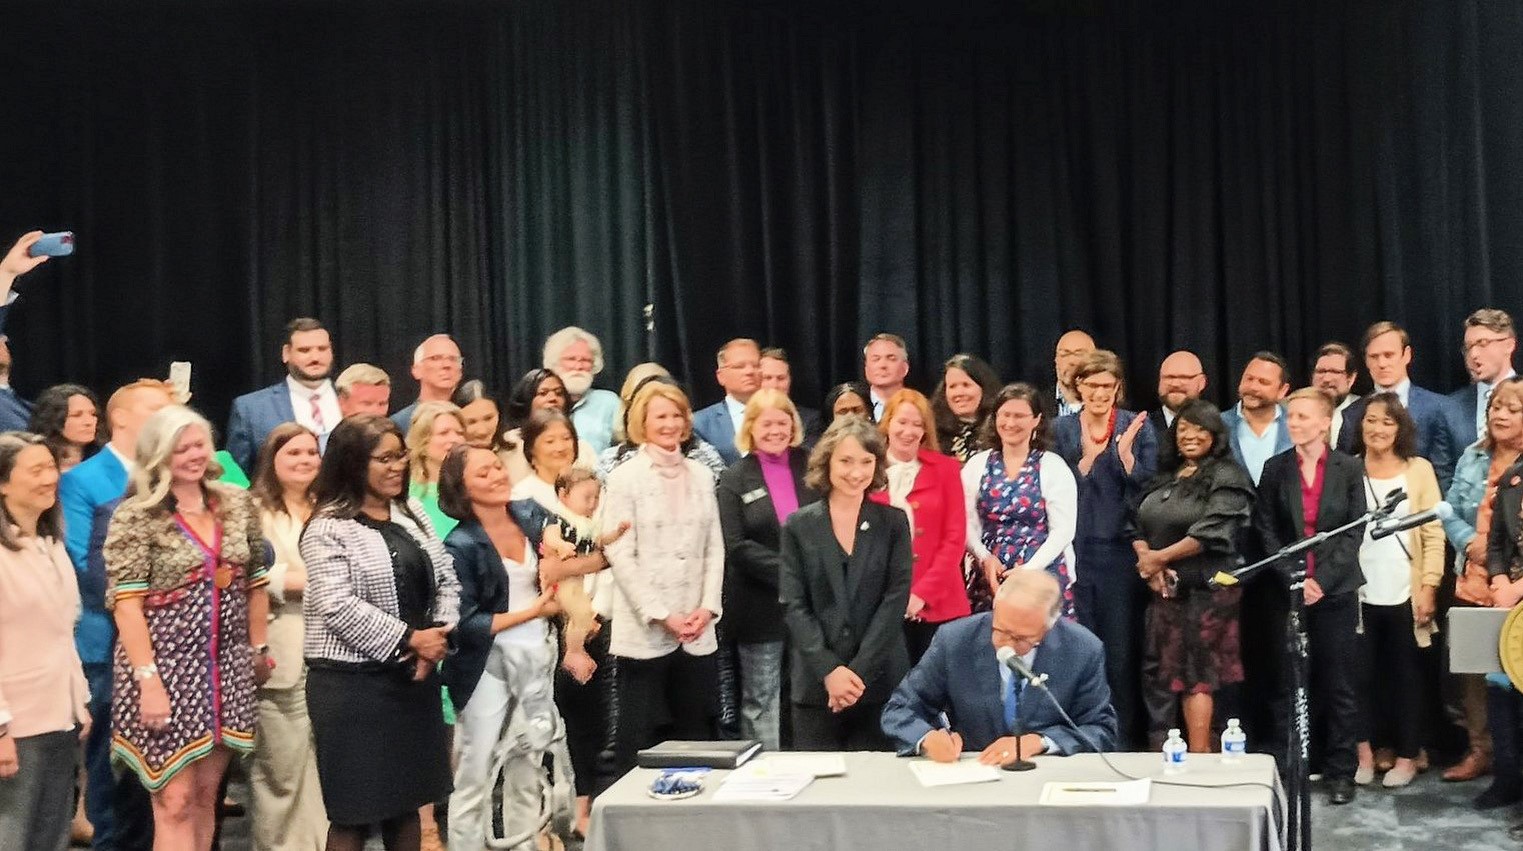 Housing abundance bills signed by Governor Inslee in Washington state in 2023. Inslee signs while surrounded by a crowd of advocates.